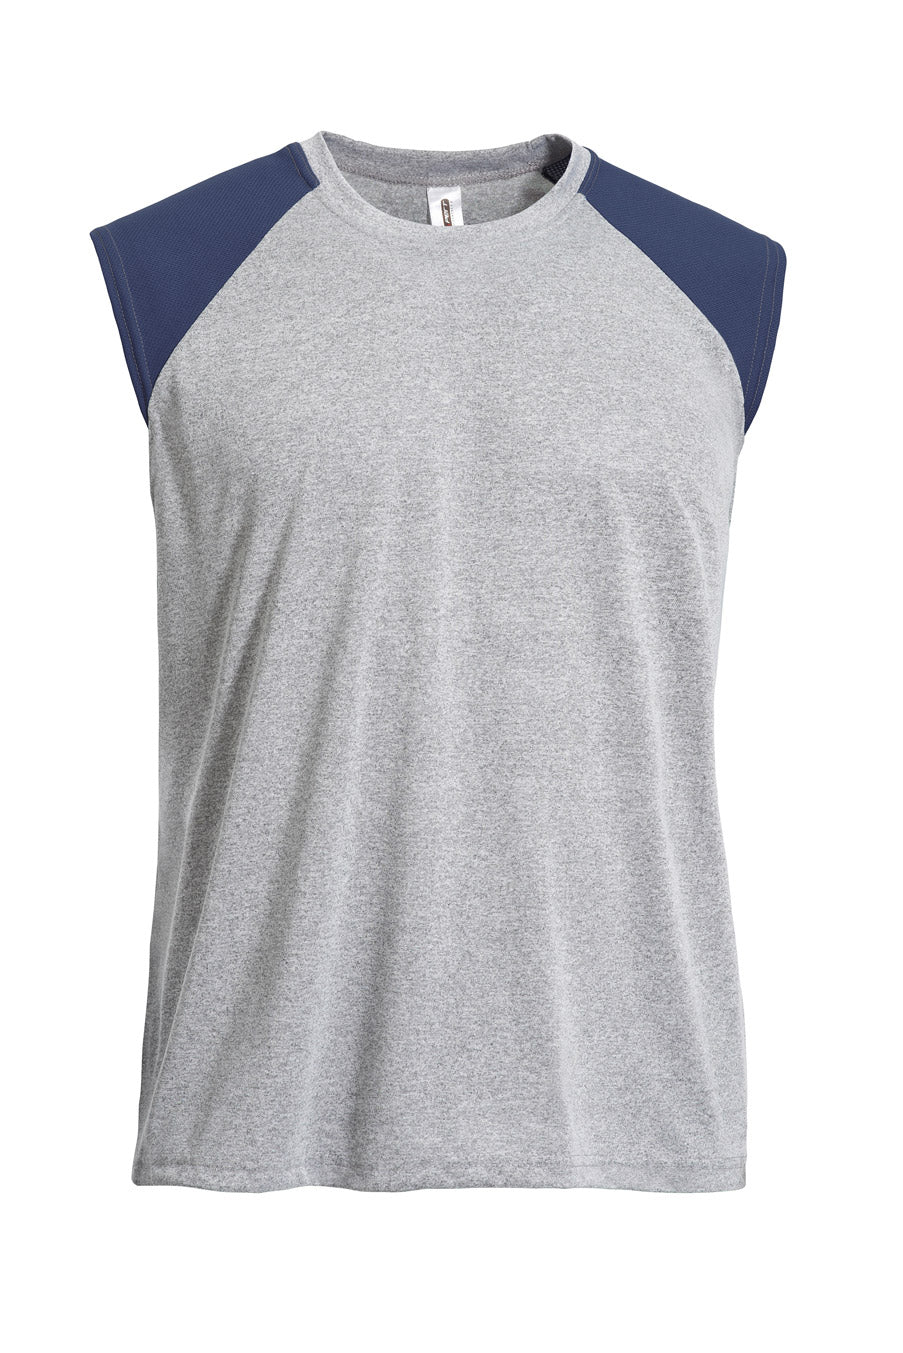 Natural Feel Jersey Colorblock Training Tank 🇺🇸 - Expert Brand Apparel#color_gray-heather-navy